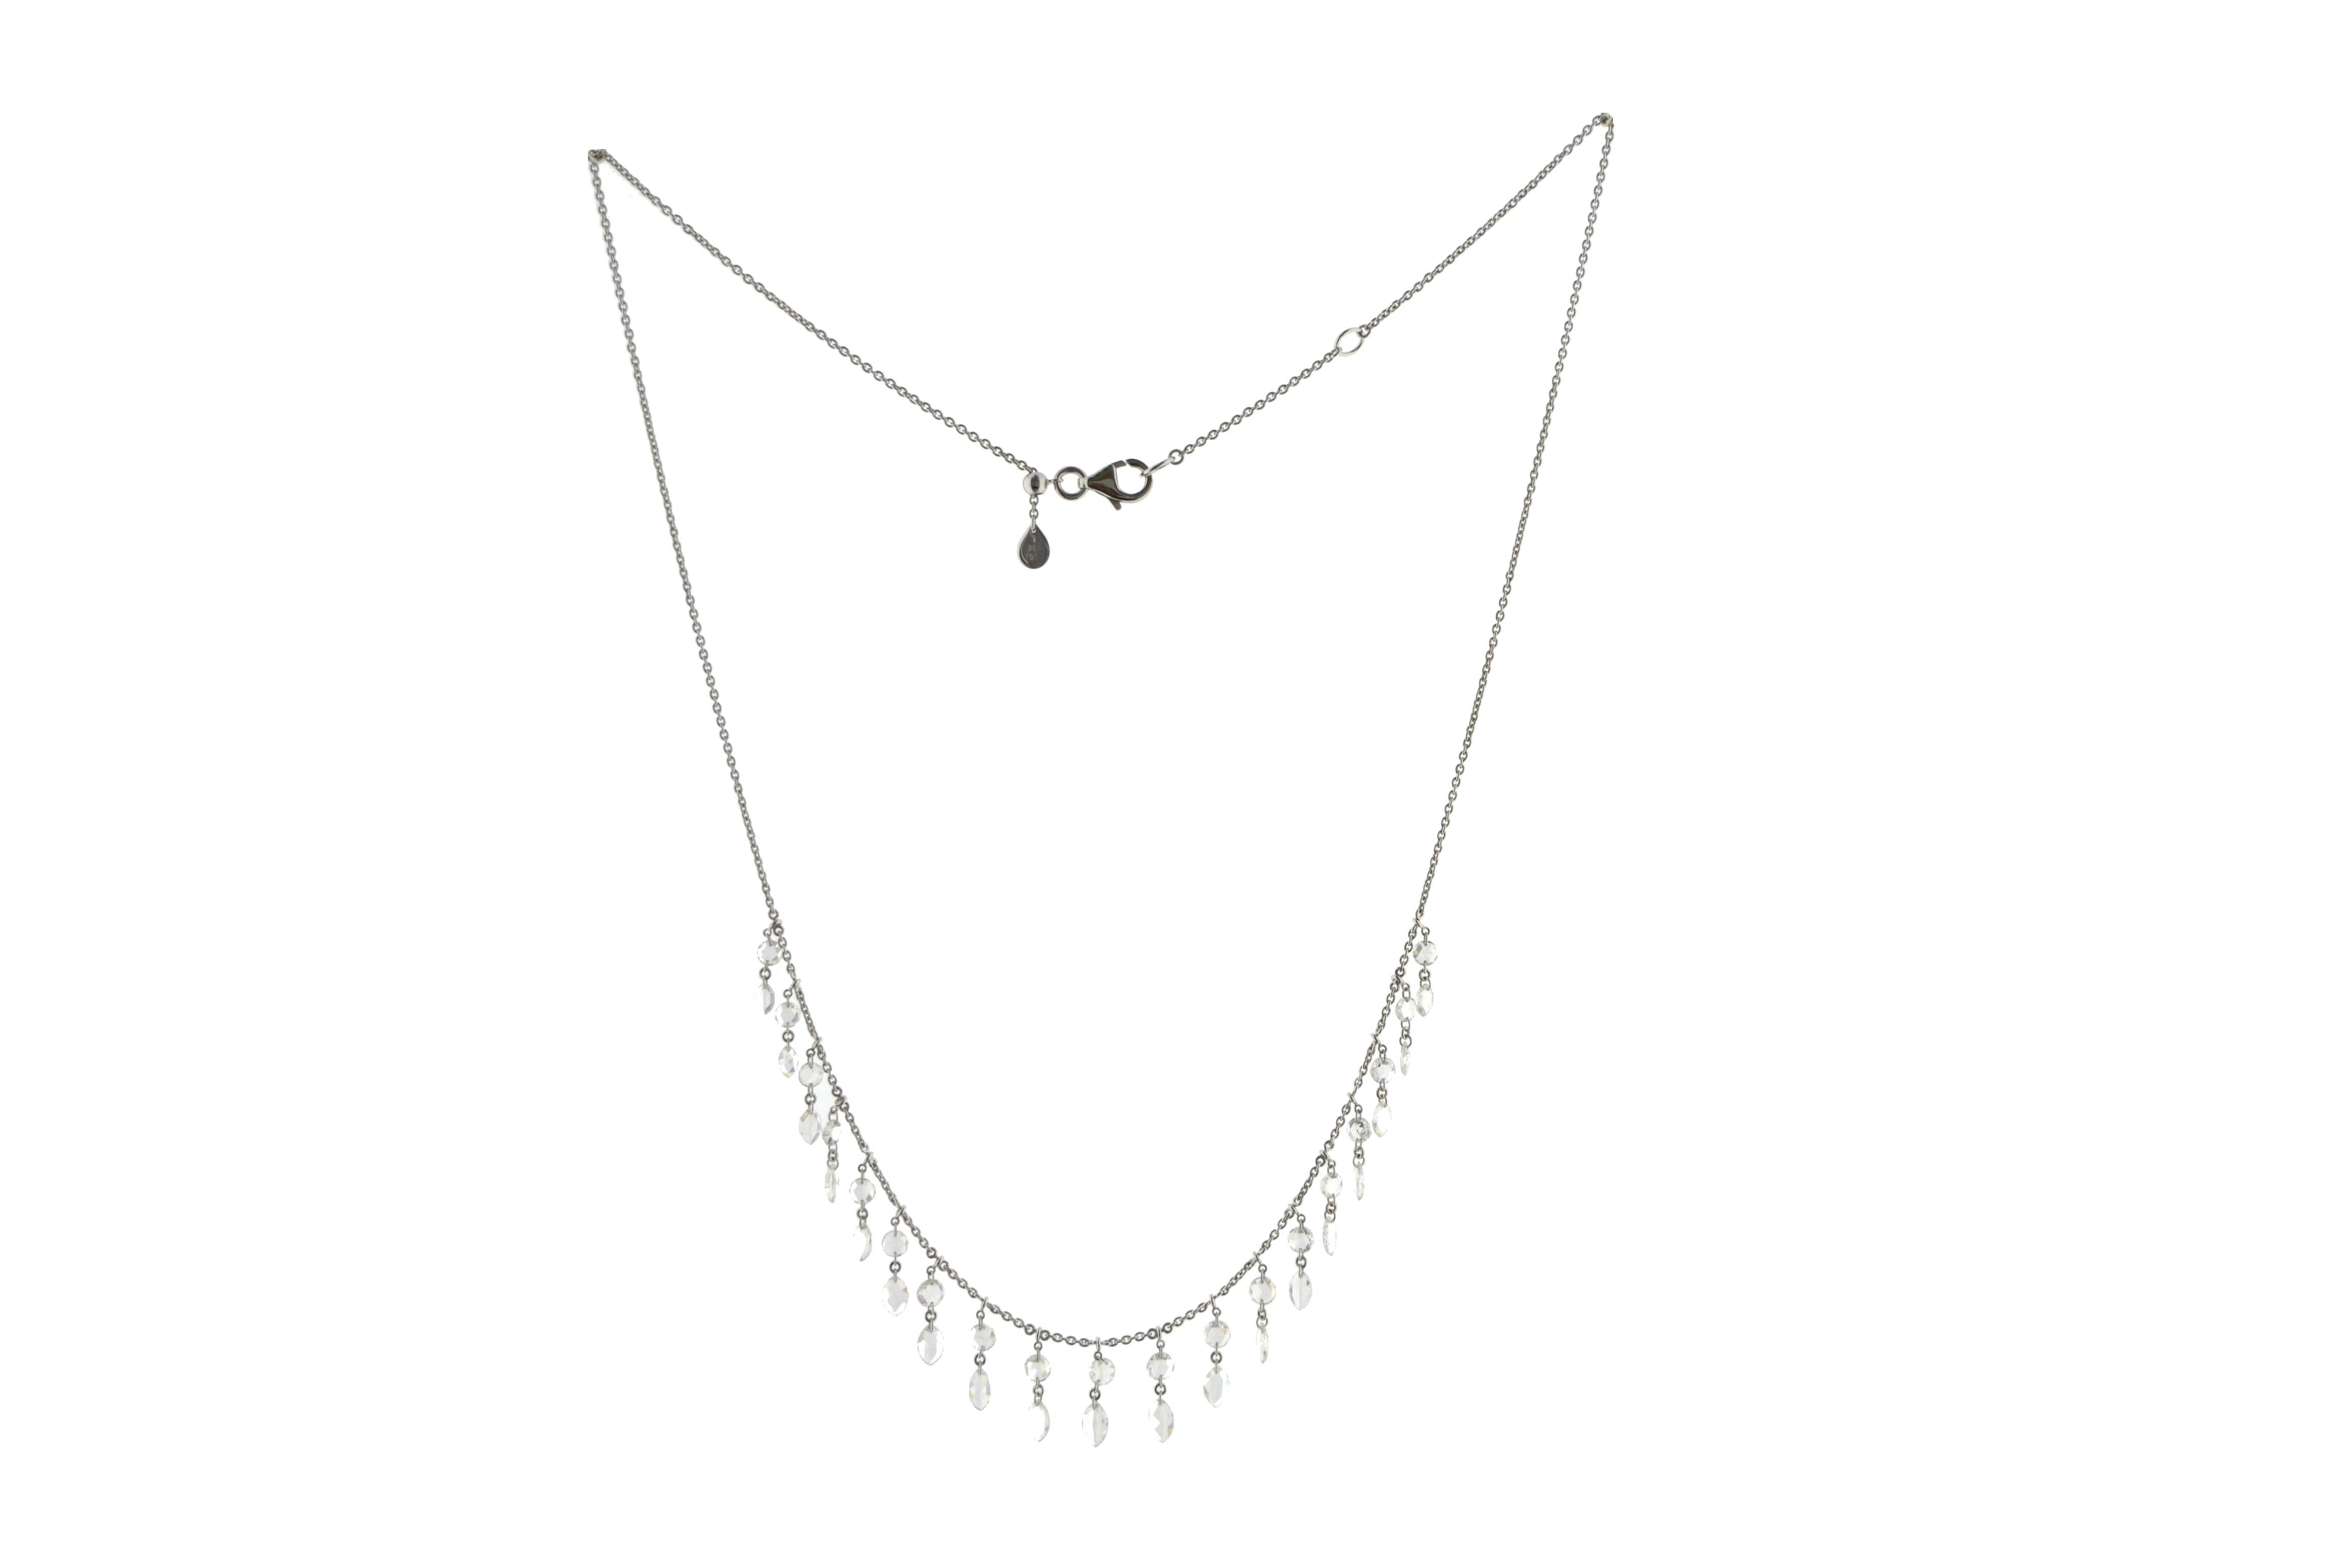 JR 3.17 Carat Rose Cut Diamond Dangling Necklace 18 Karat White Gold

This contemporary piece of necklace is made of Drilled Rose cut diamond and it eludes femininity & grace. Diamond Rose Cut Dangling Choker has Slider ball to adjust the length